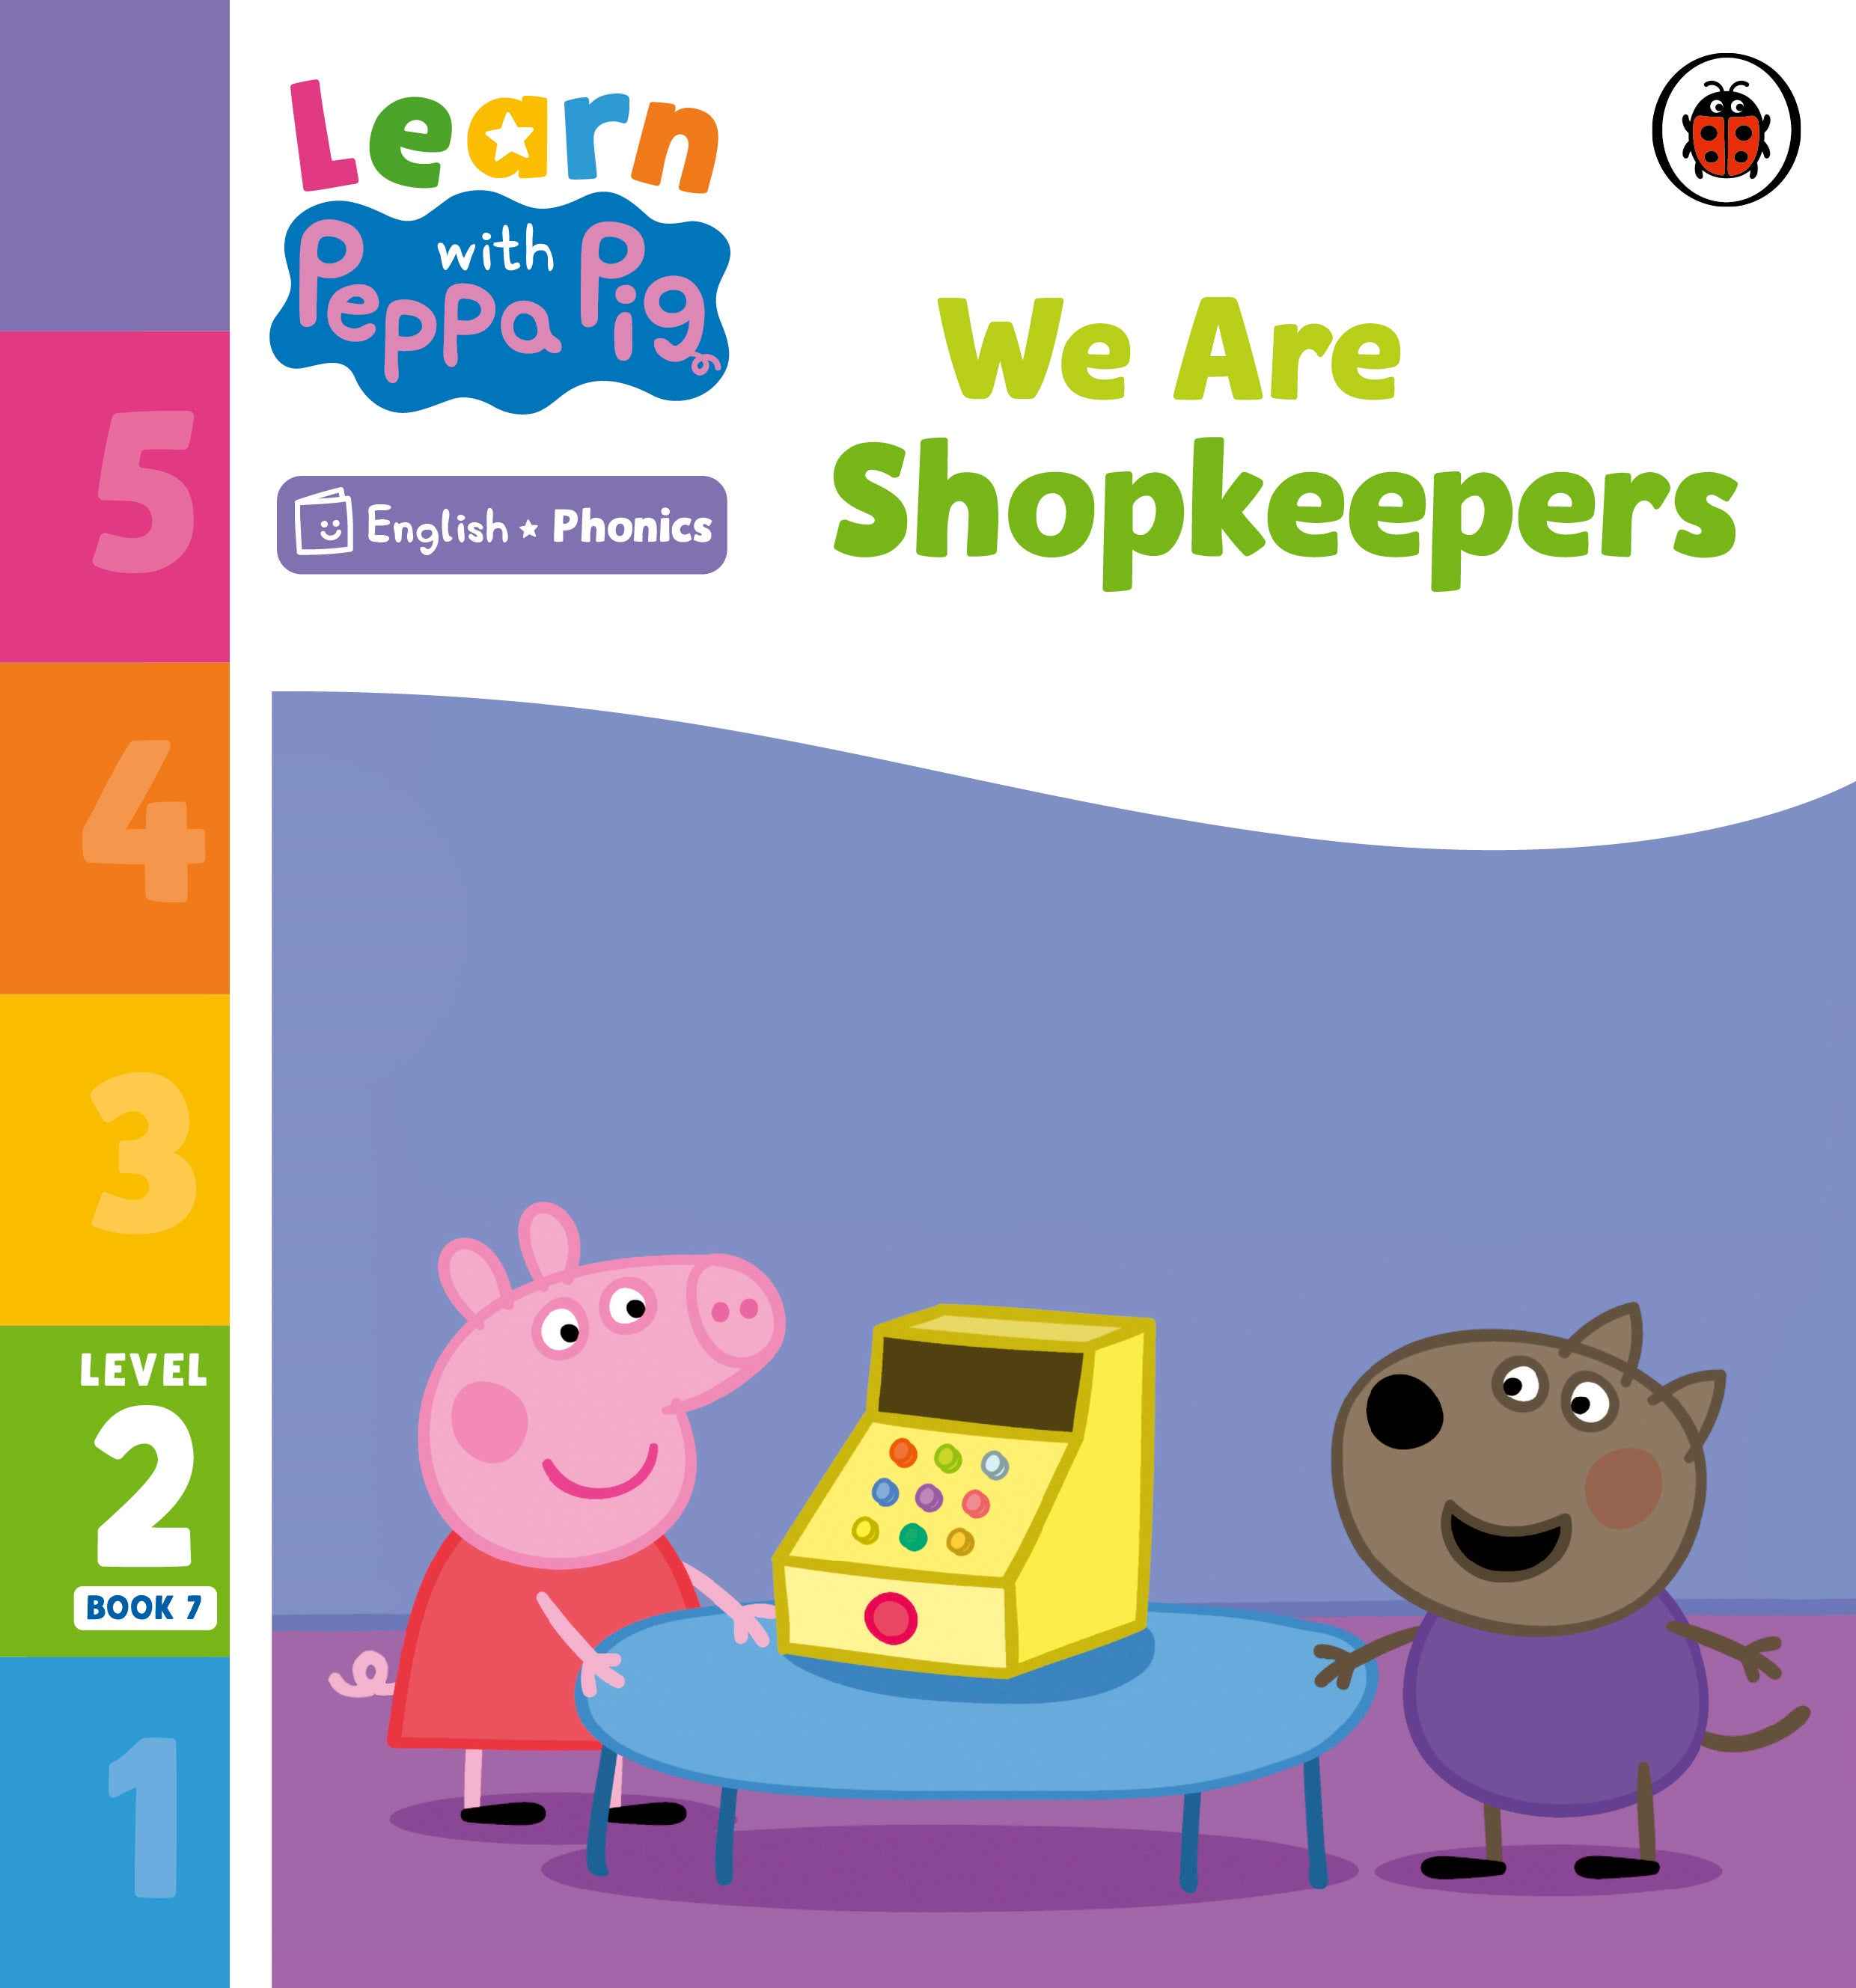 We Are Shopkeepers